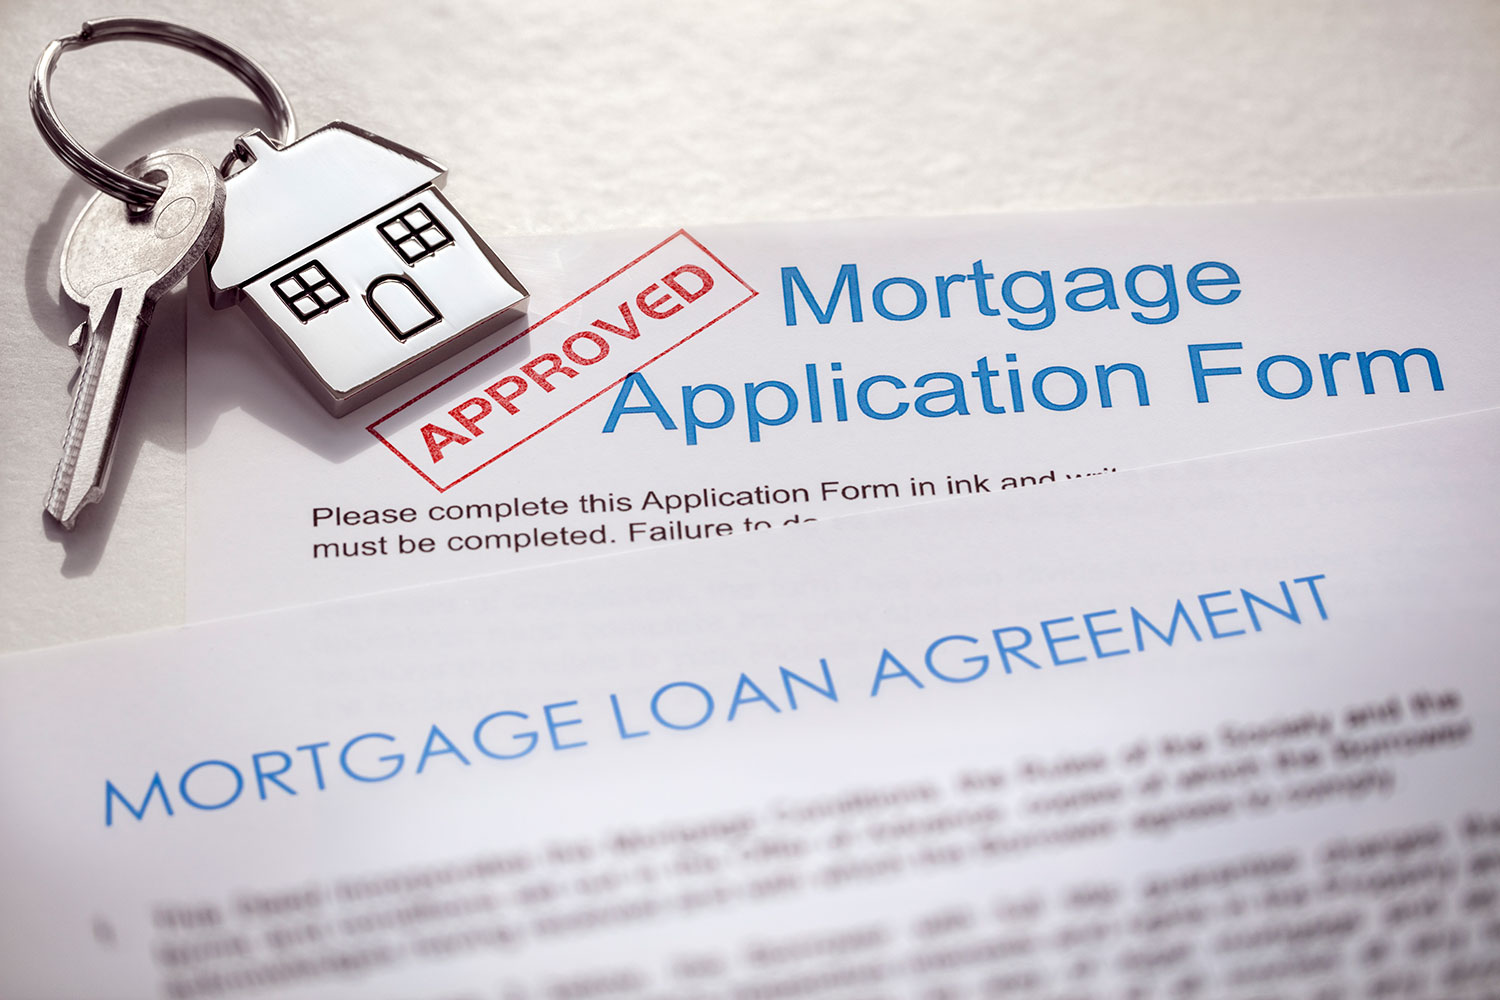 100% mortgages: the good and the bad